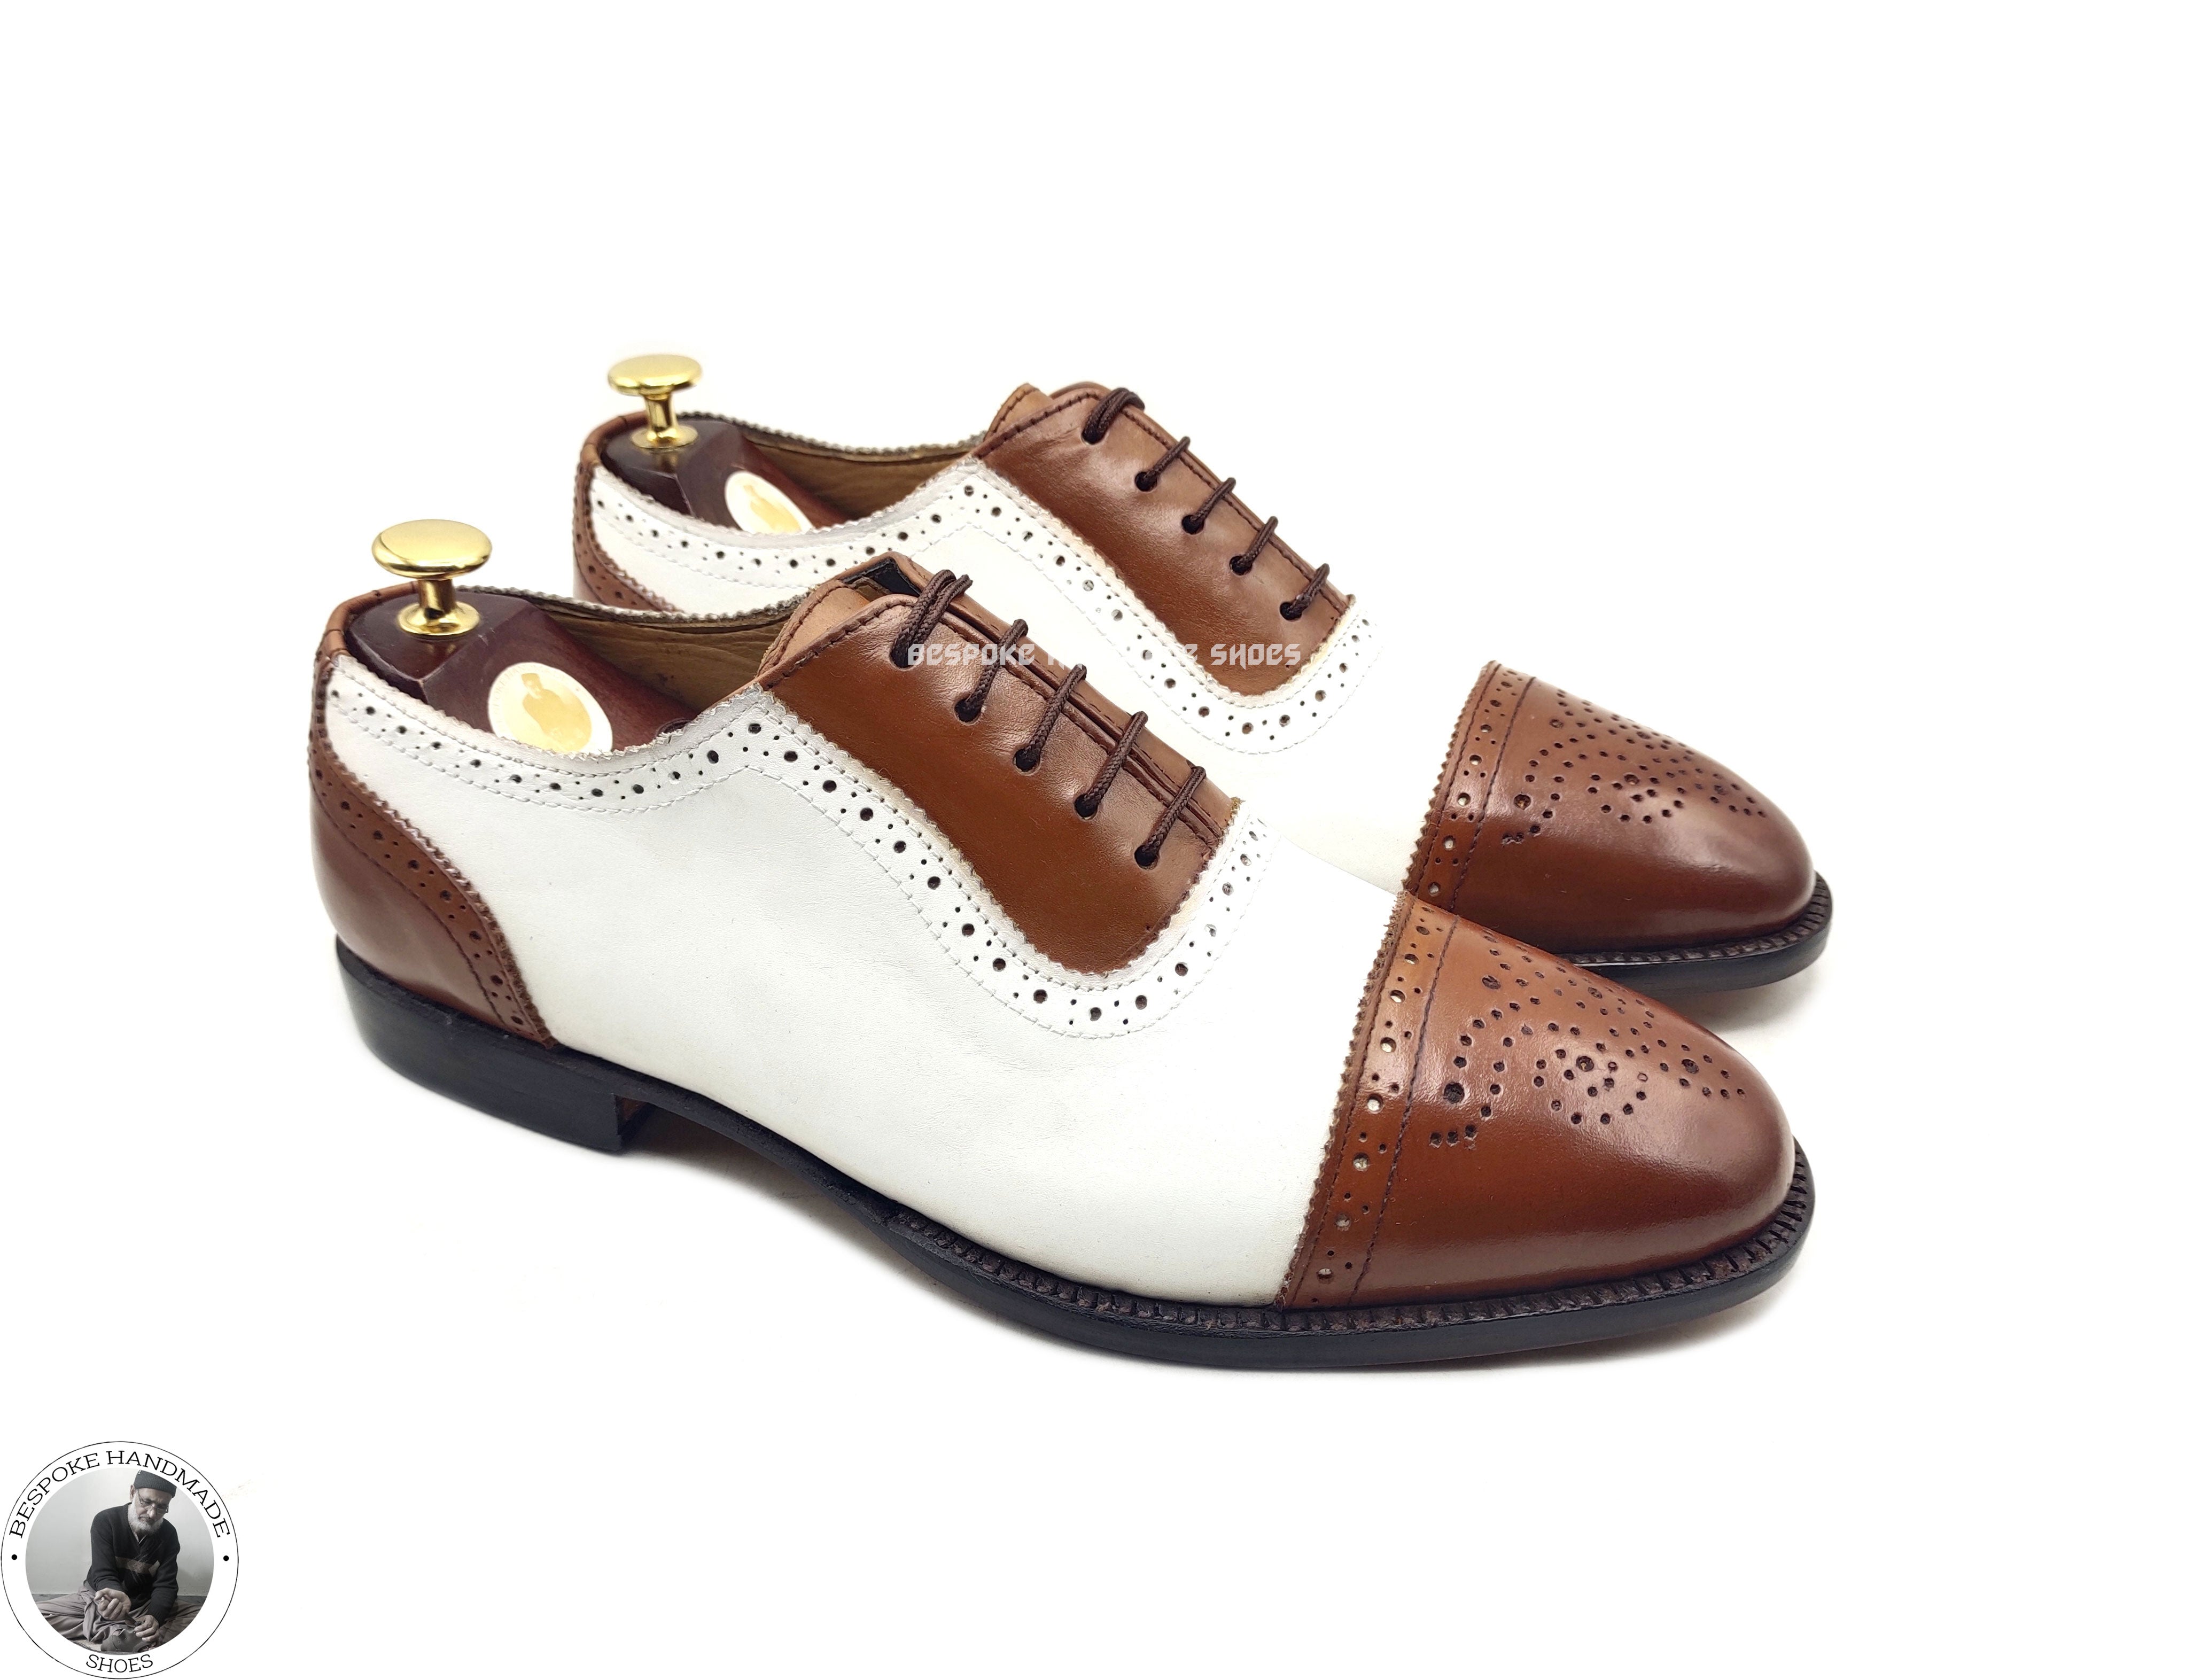 Handcrafted Men's White and Brown Leather Toe cap Brogue Oxford Lace up Formal Shoes